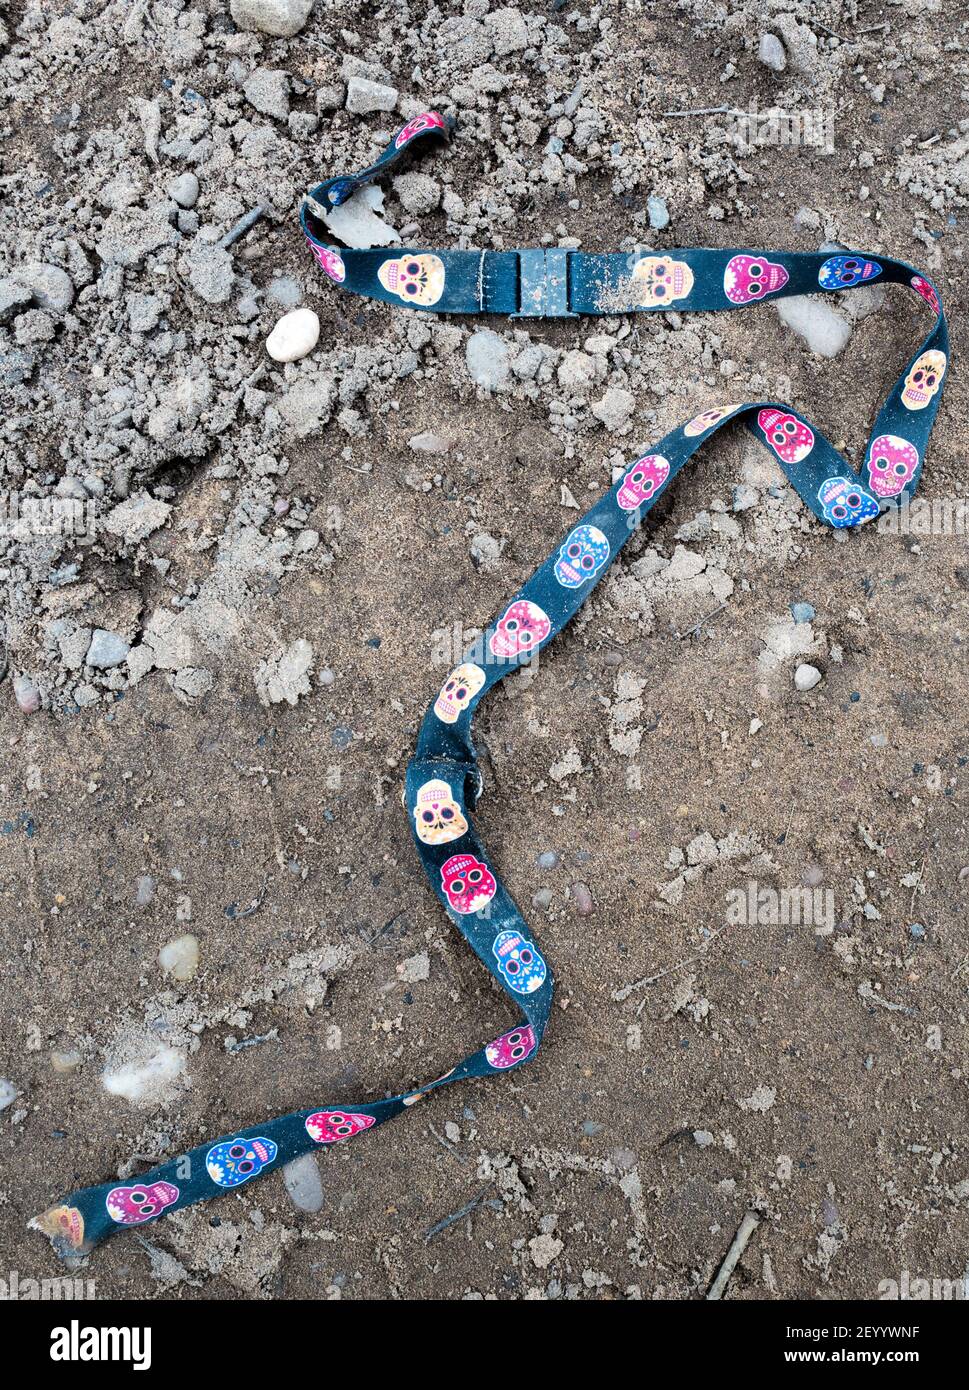 Discarded lanyard with colourful human skull motifs. Stock Photo